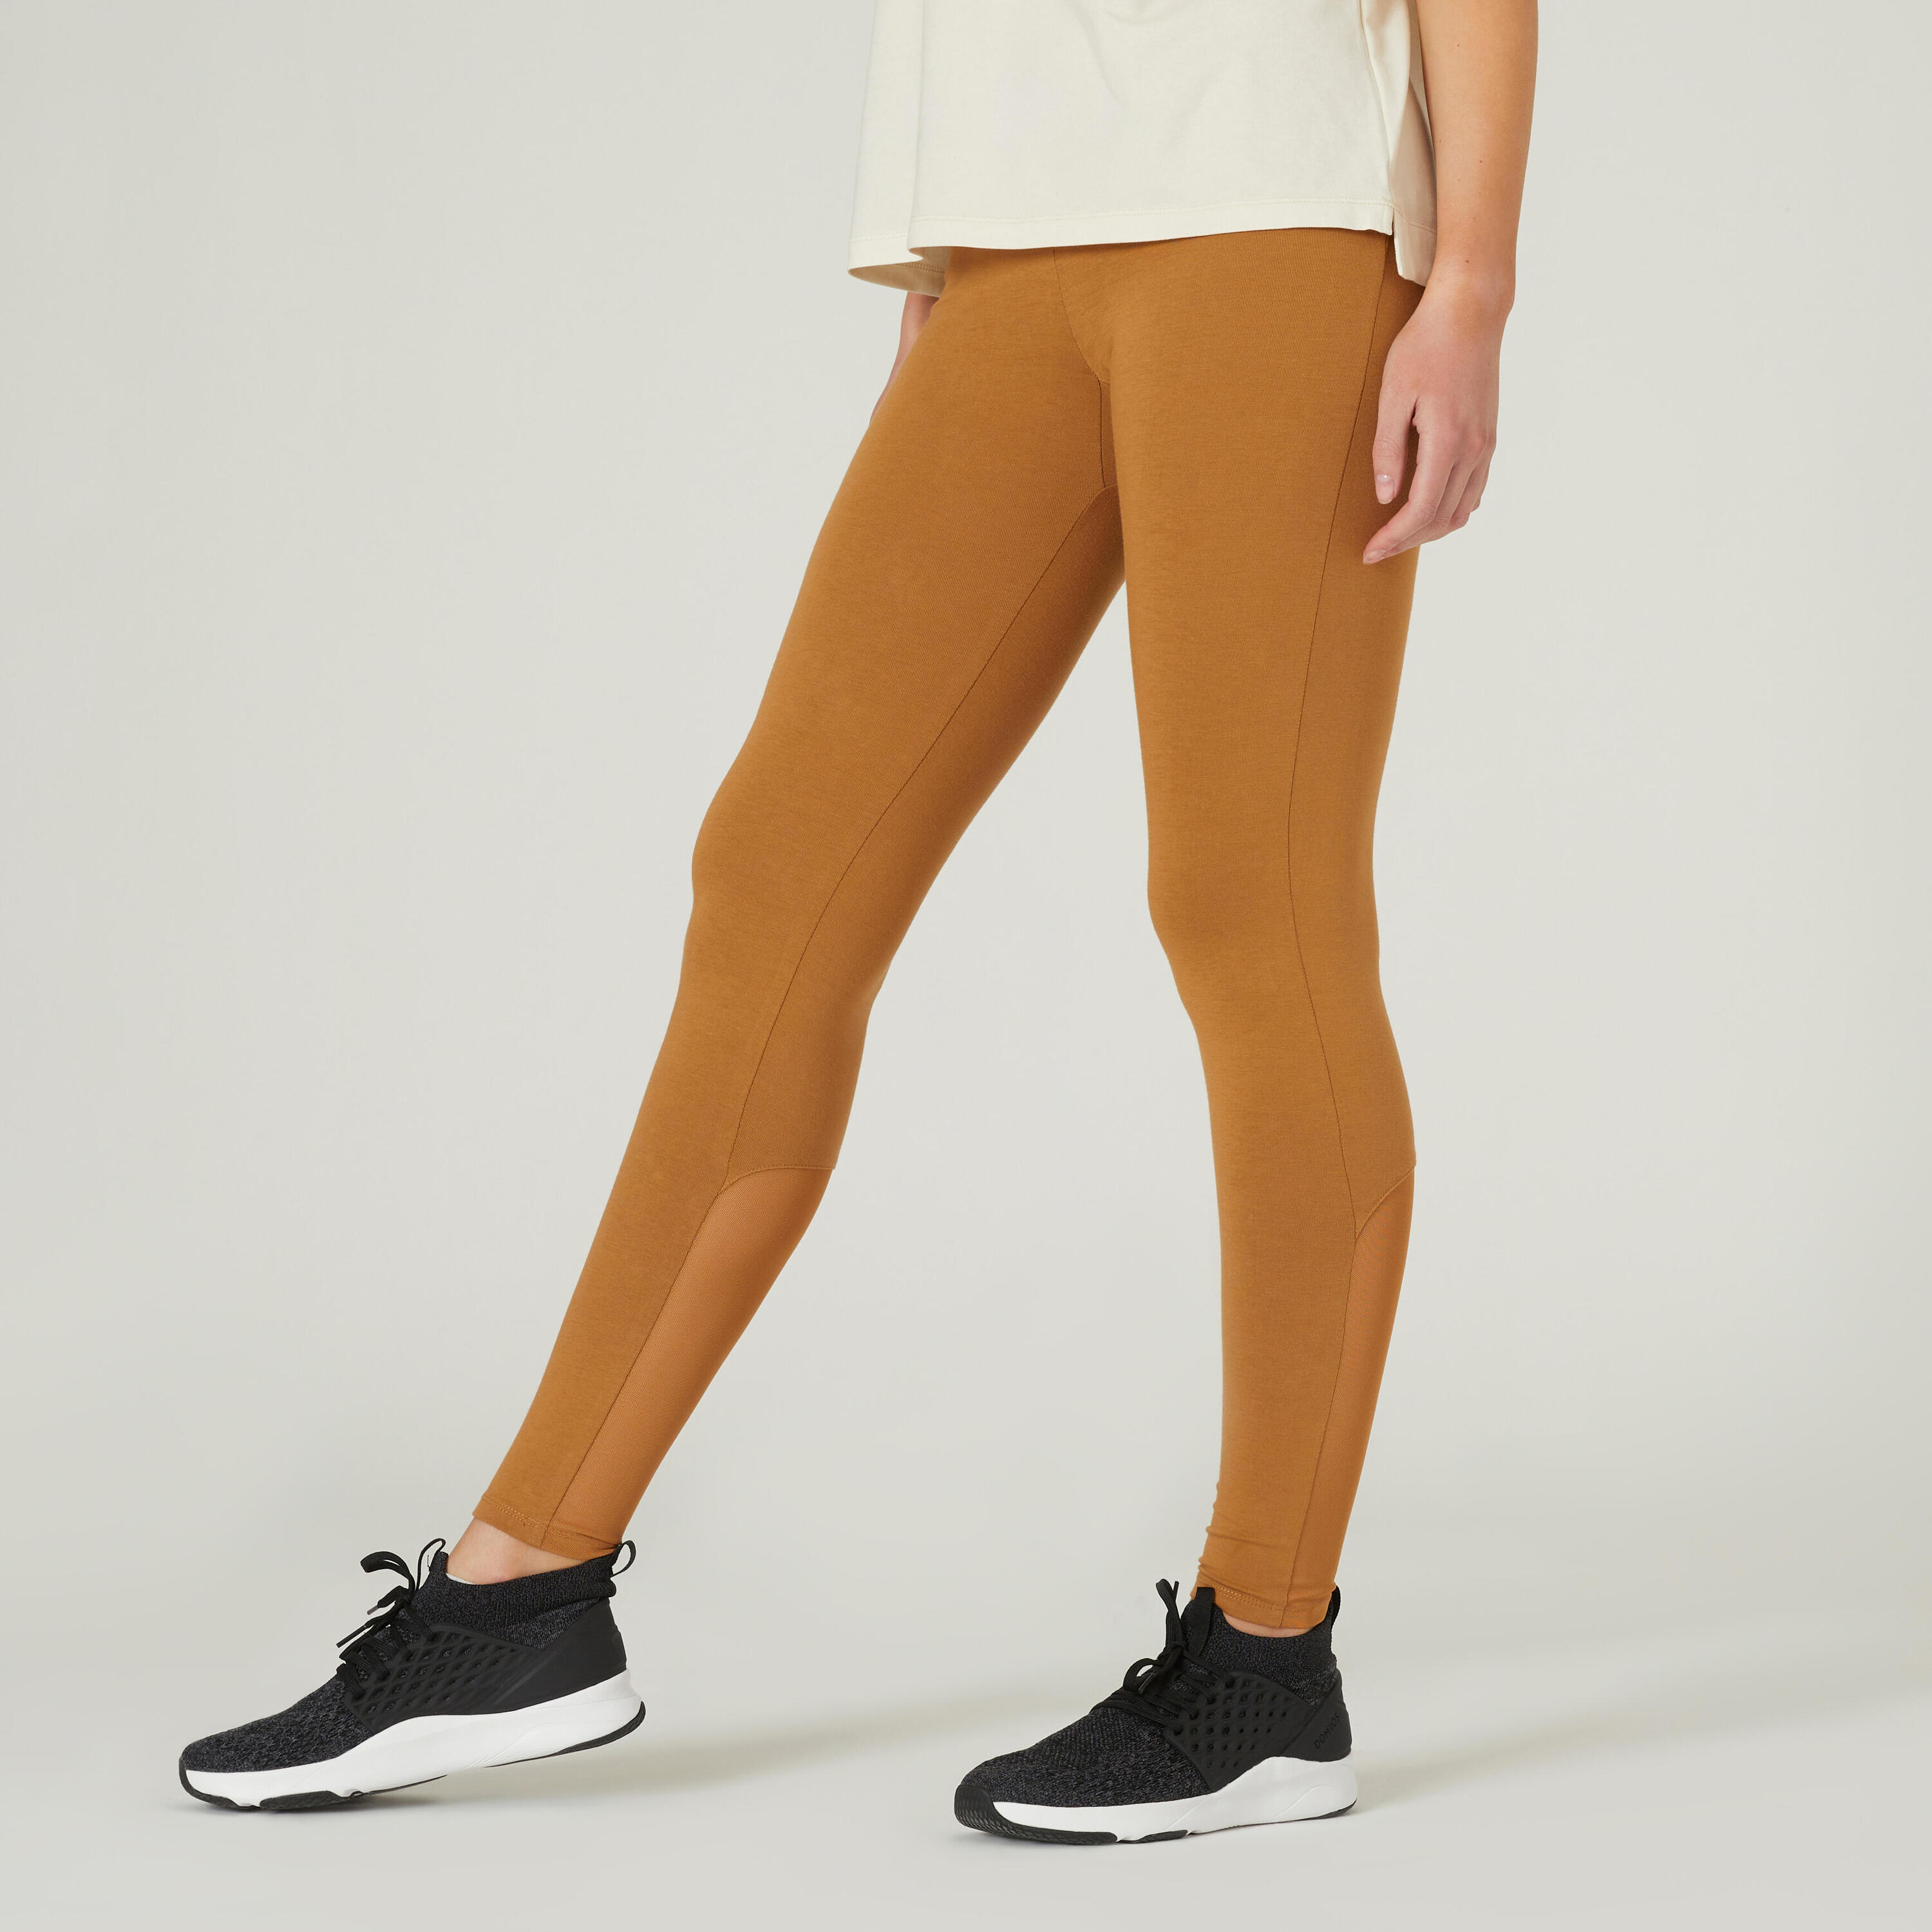 Stretchy High-Waisted Cotton Fitness Leggings with Mesh - Hazelnut 1/7